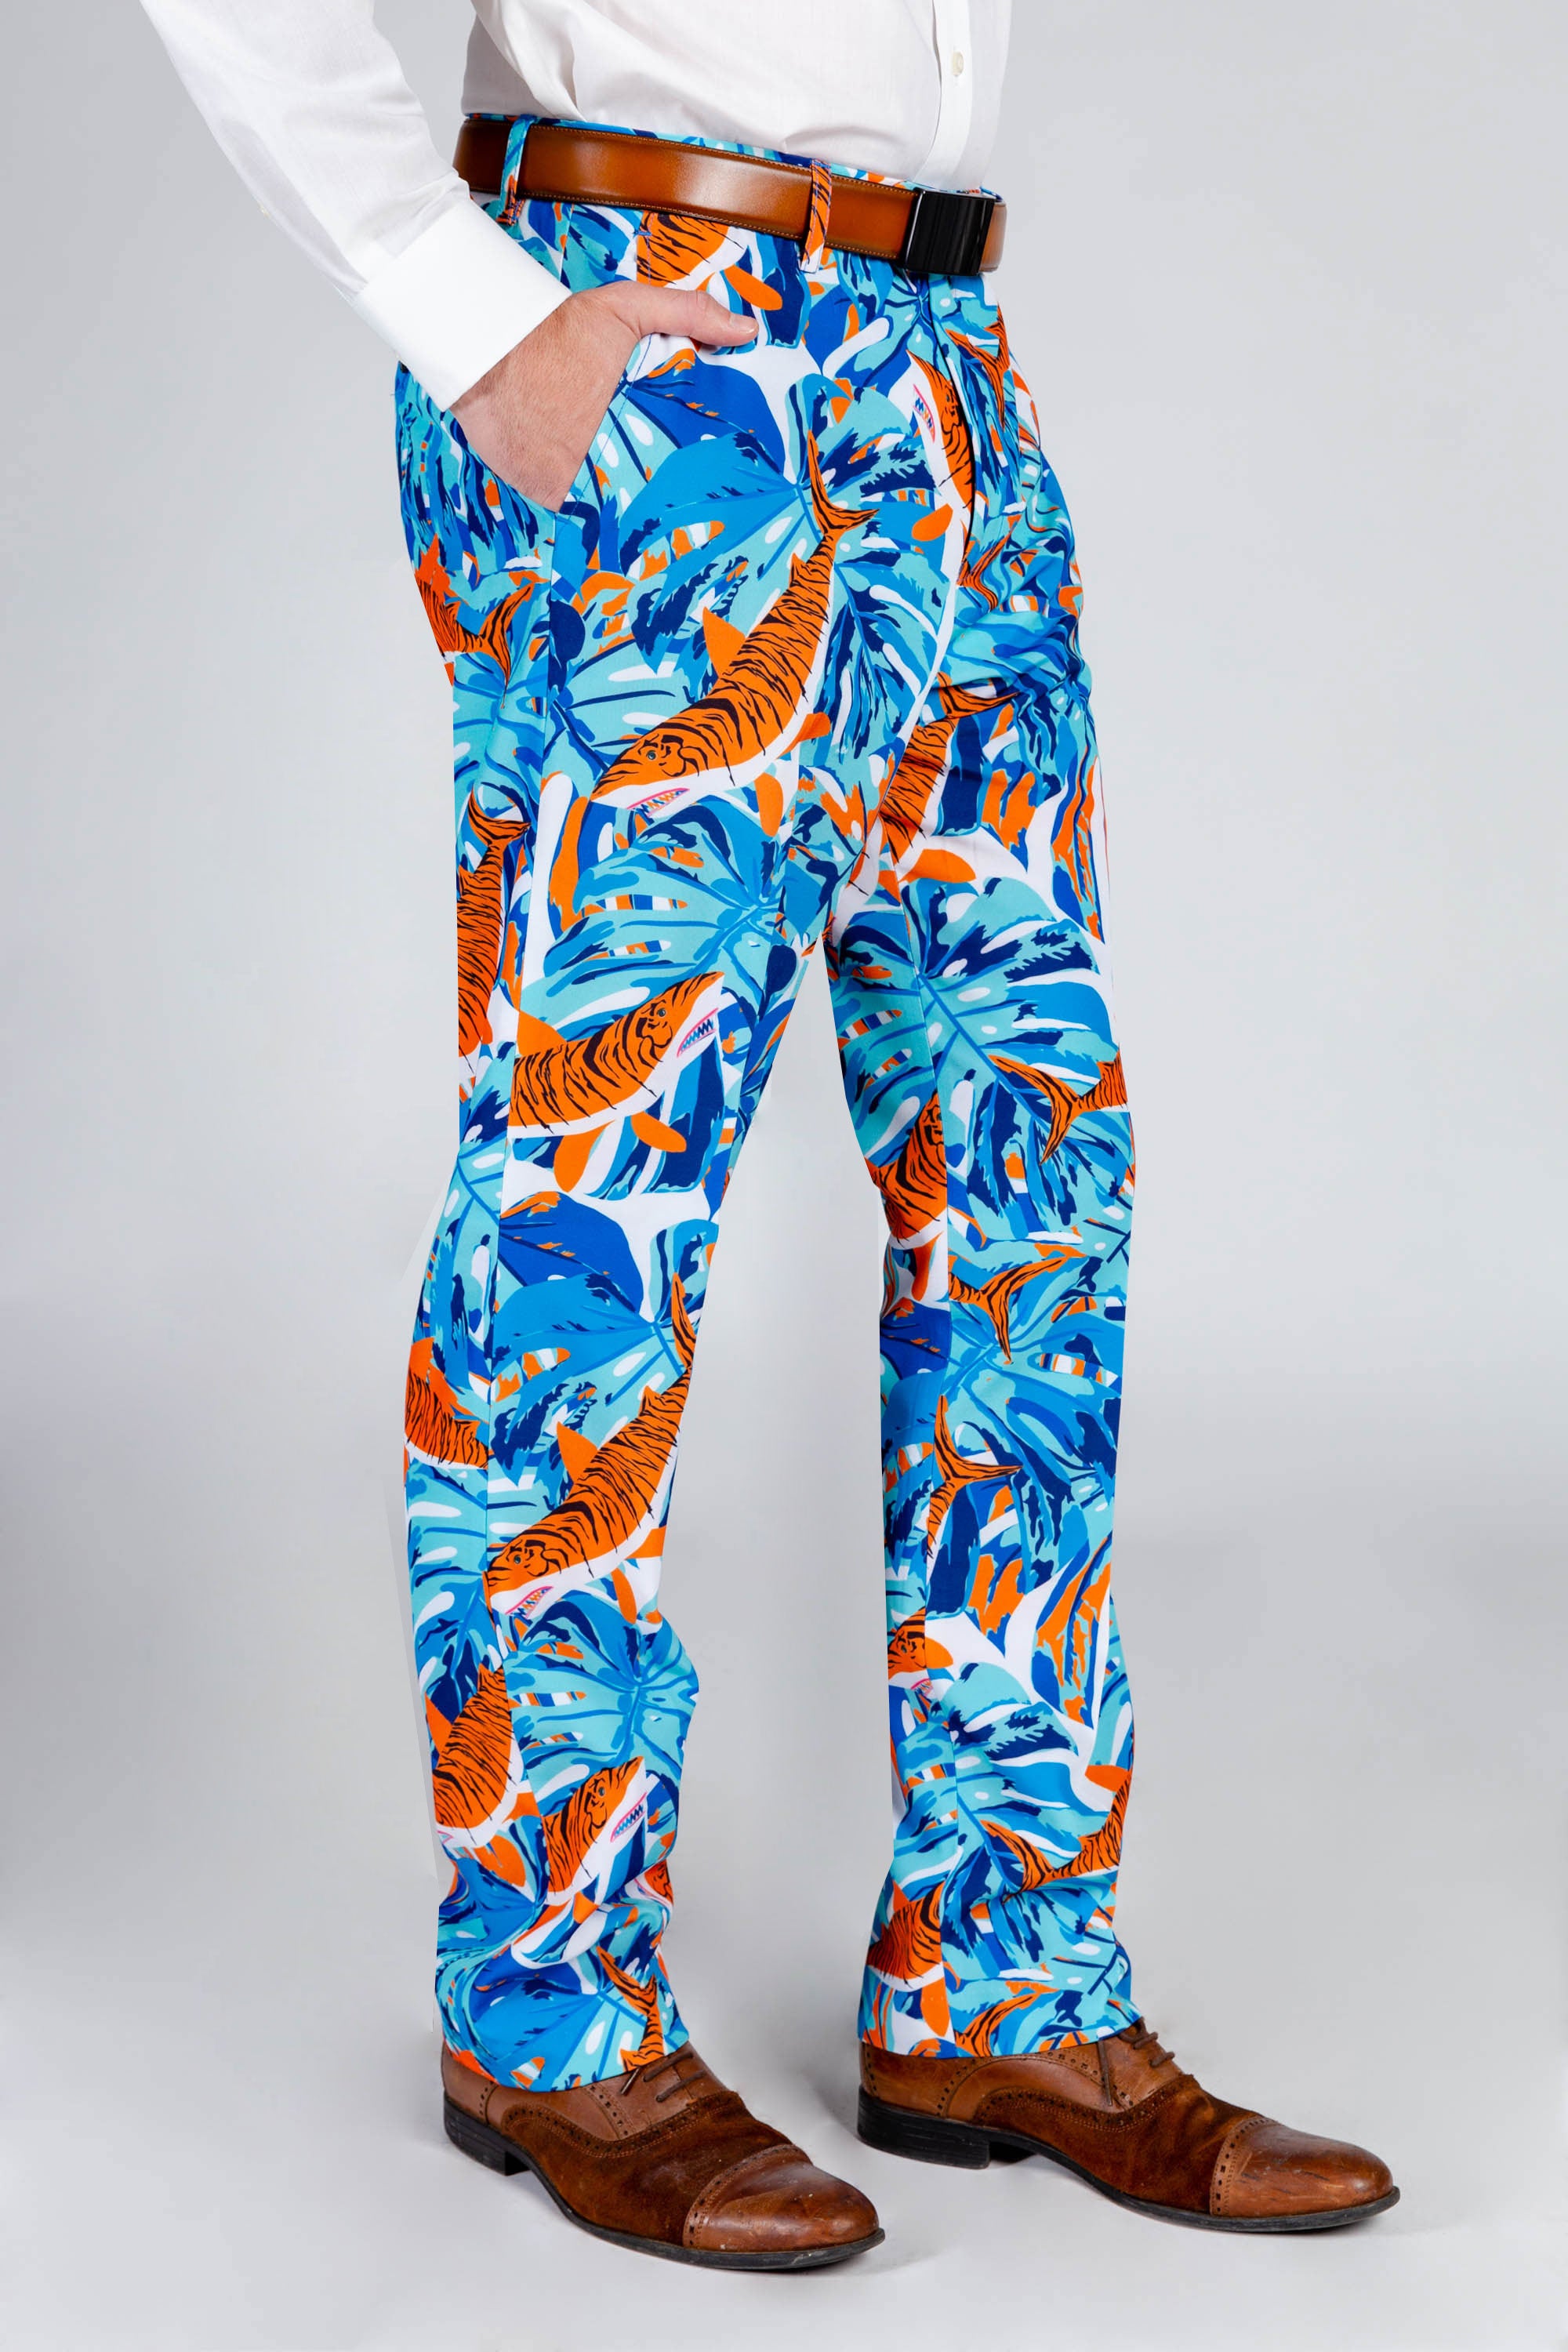 The Literalist | Tiger Shark Party Pants